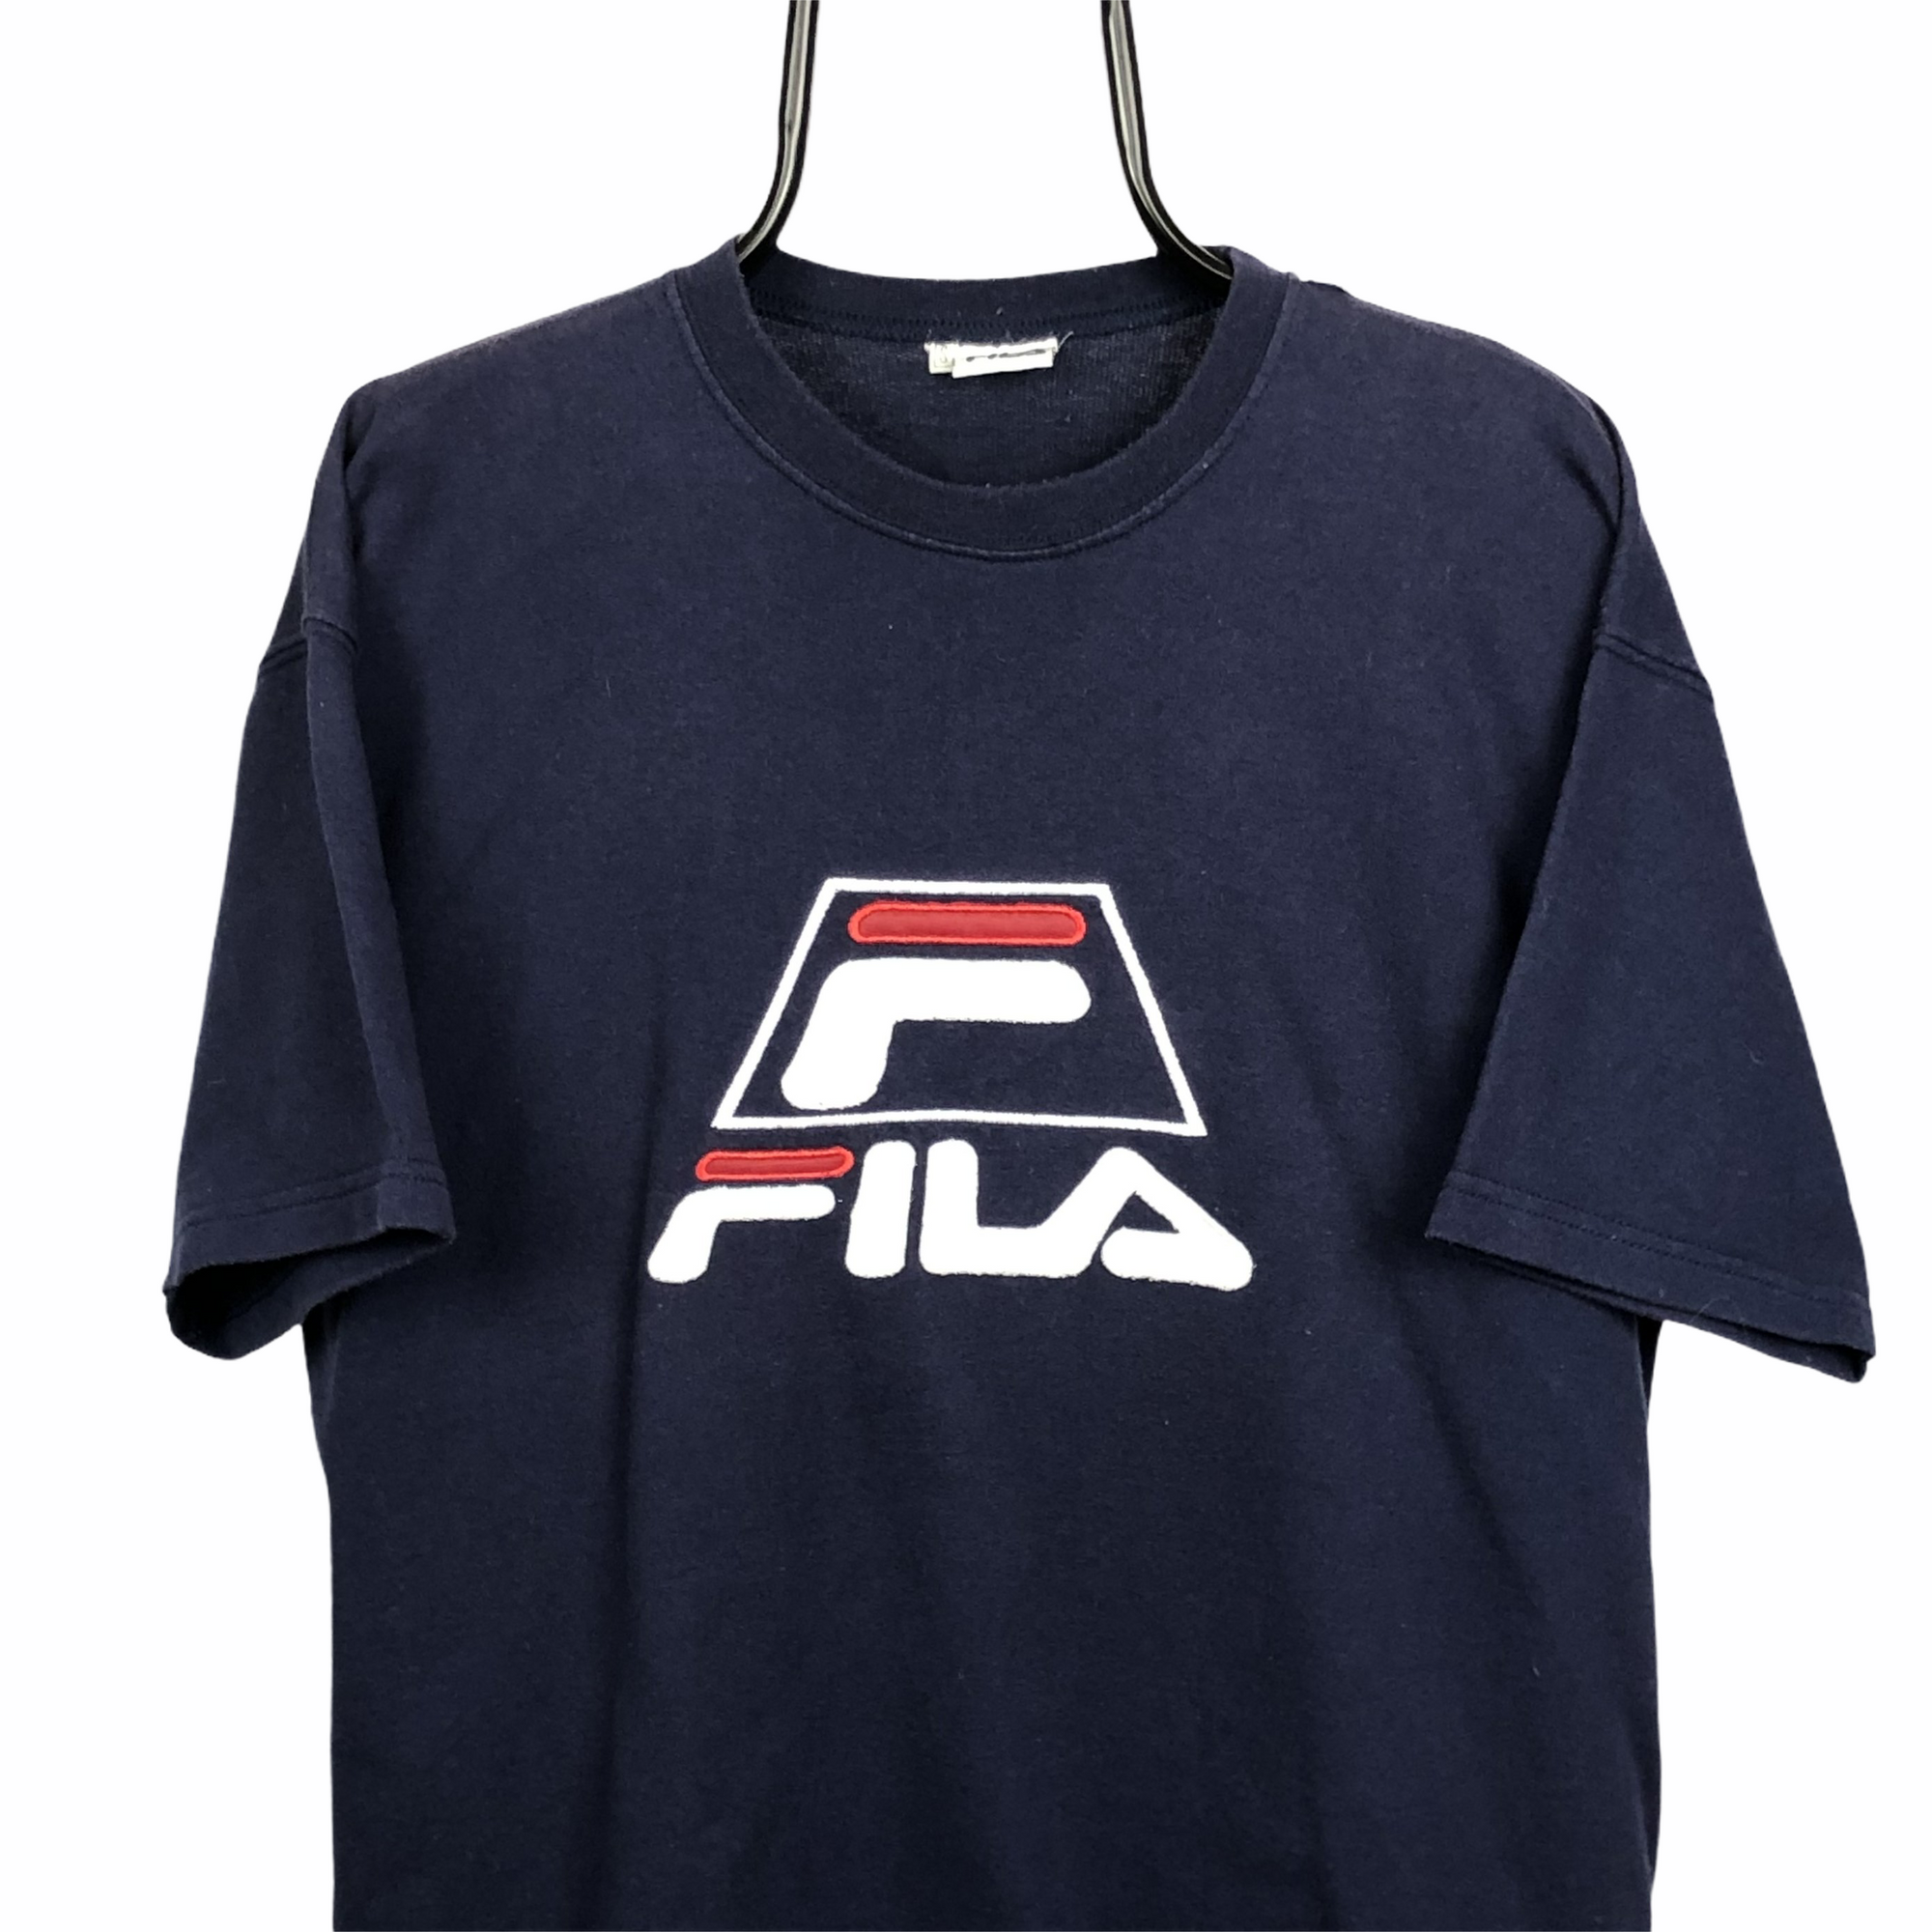 Vintage 80s Fila Embroidered Spellout Tee in Navy - Men's Medium/Women's Large